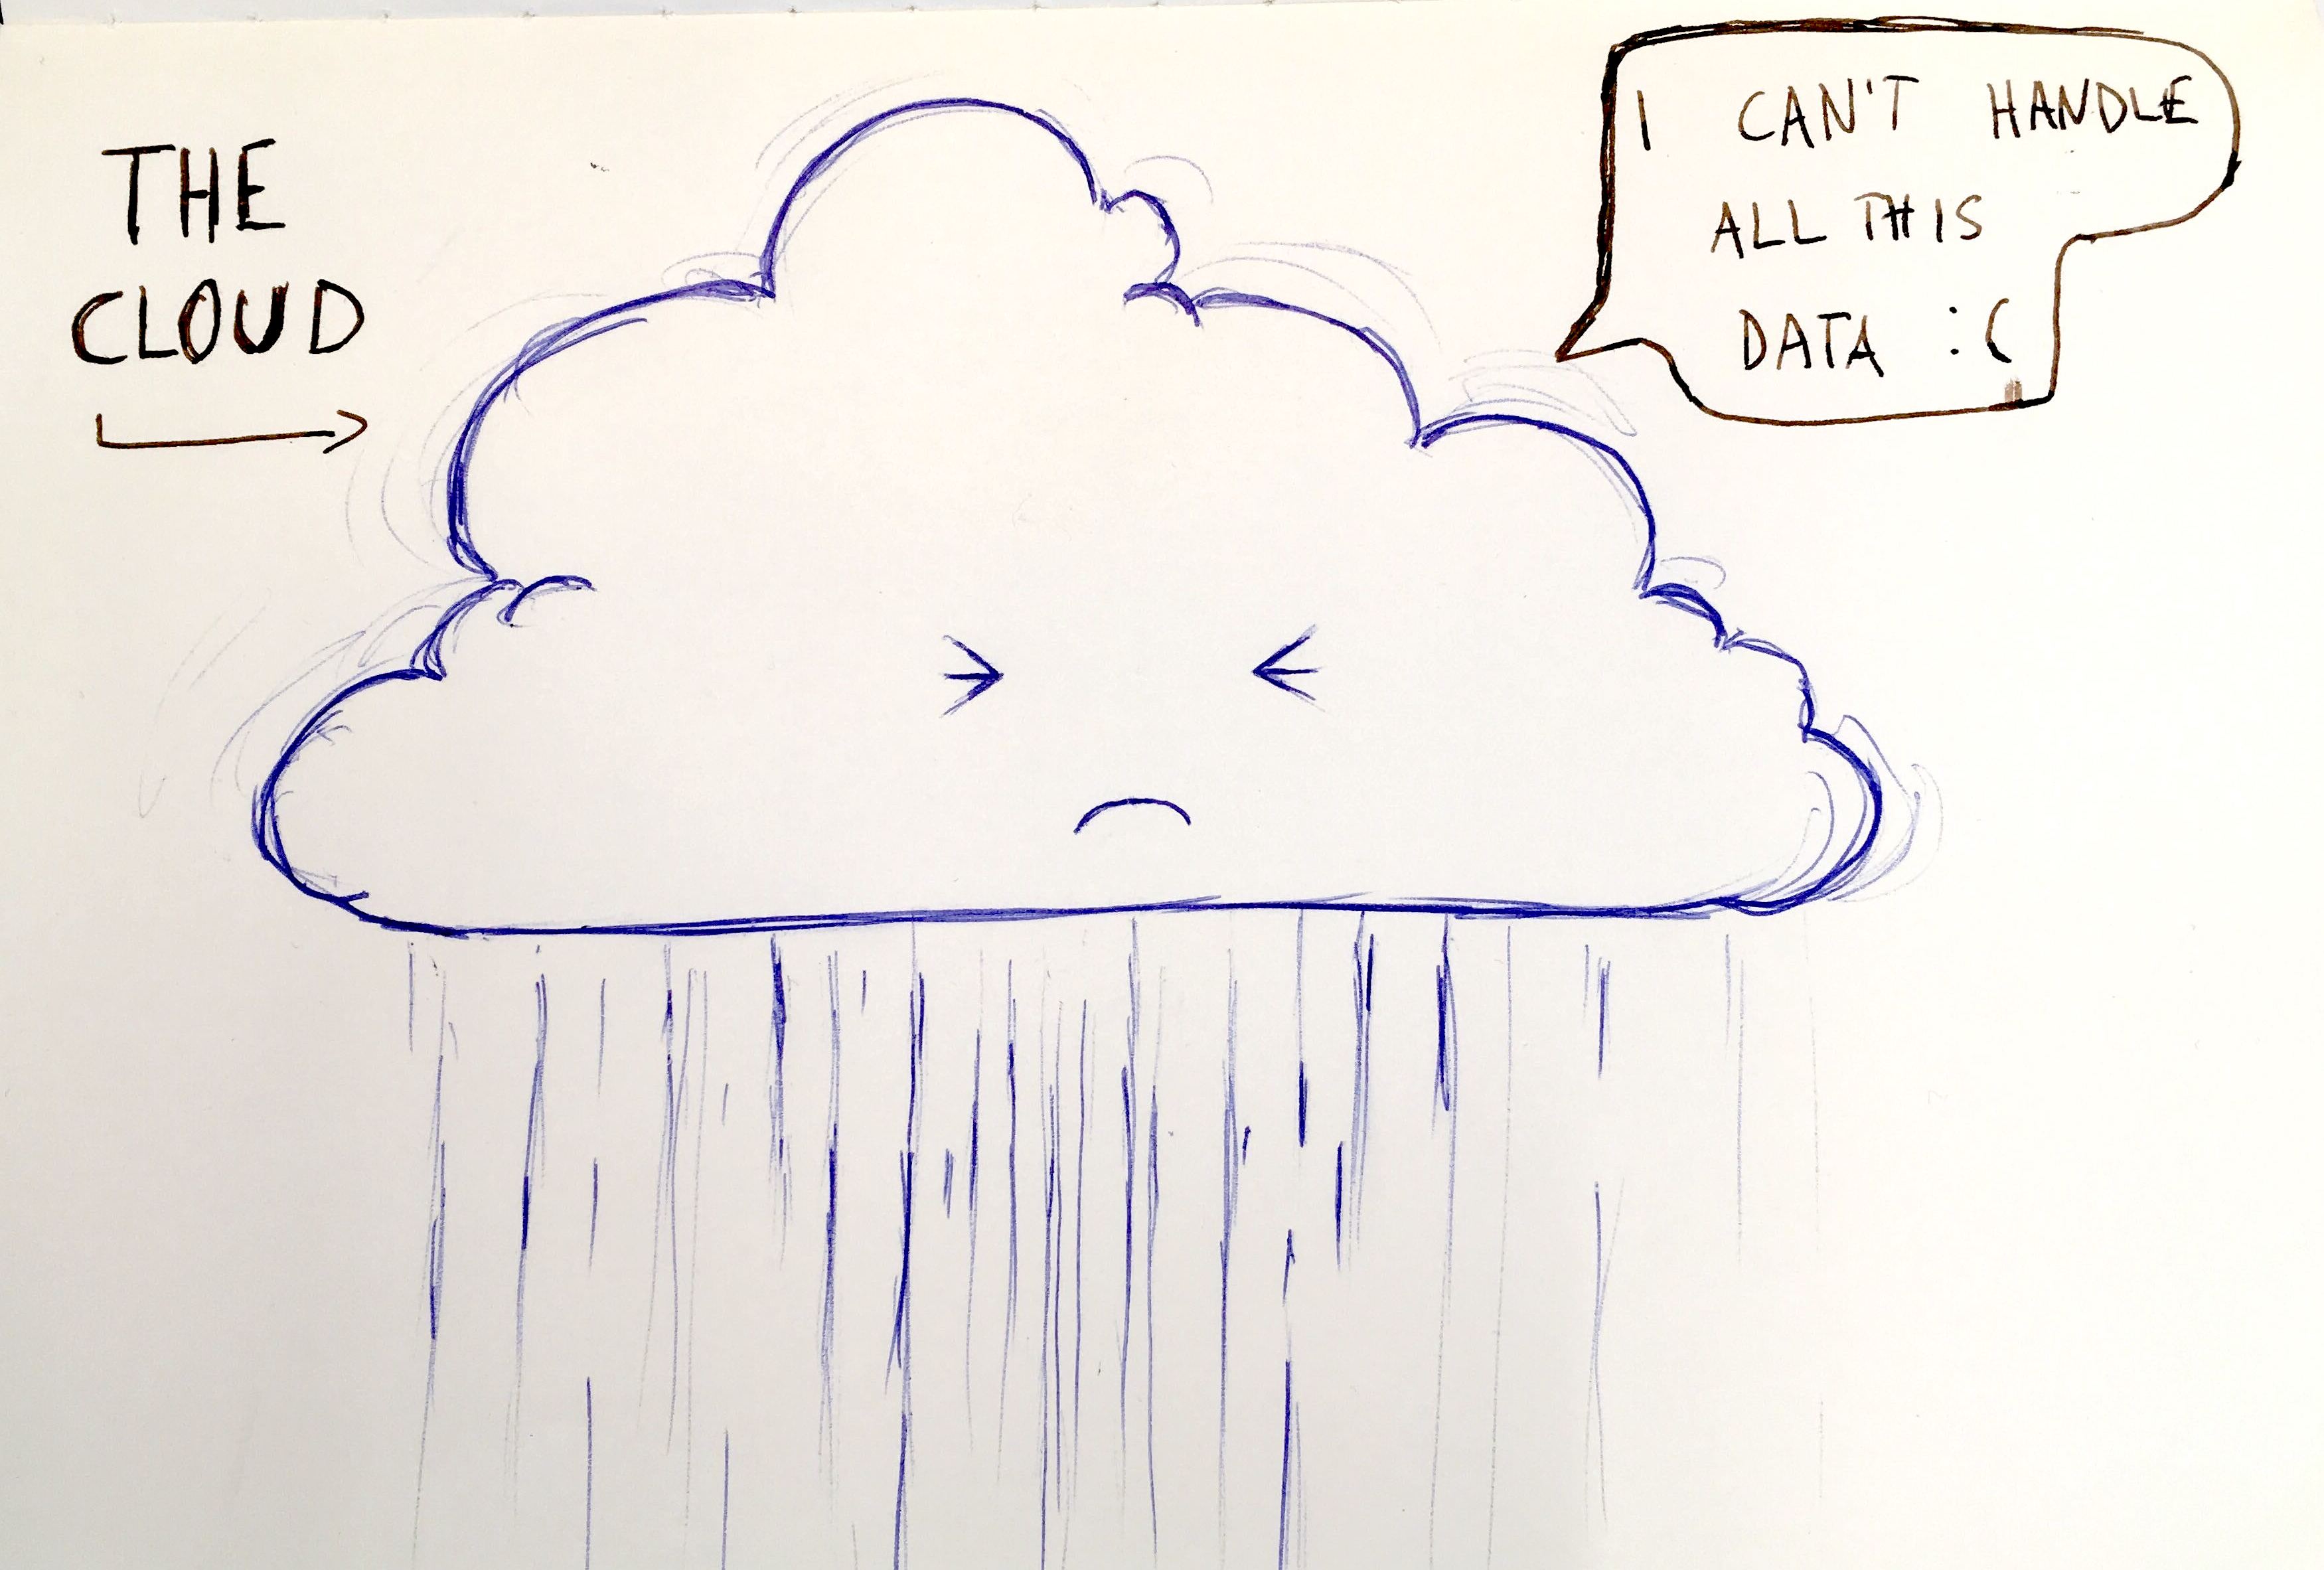 Image of a leaking data cloud